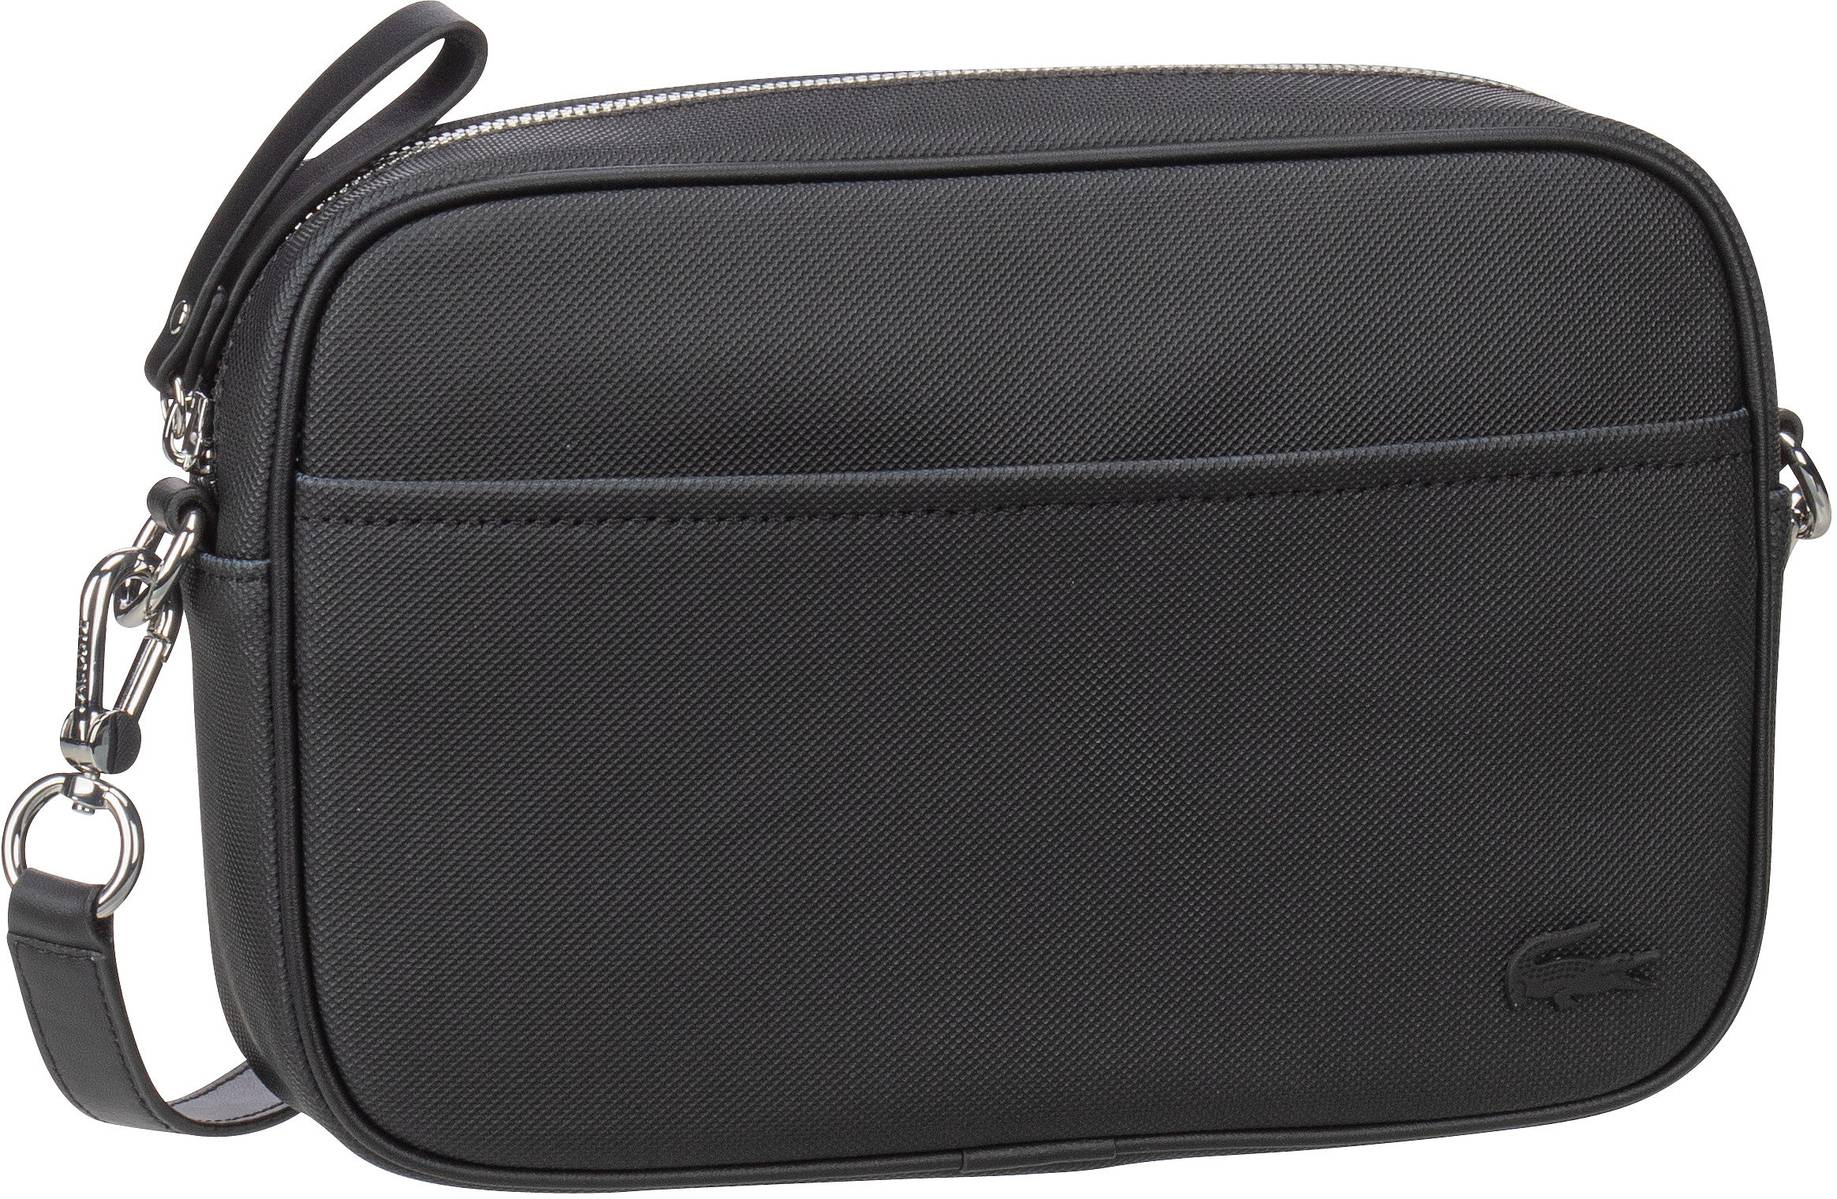 Lacoste Daily Lifestyle Crossover Bag 3954 - Black